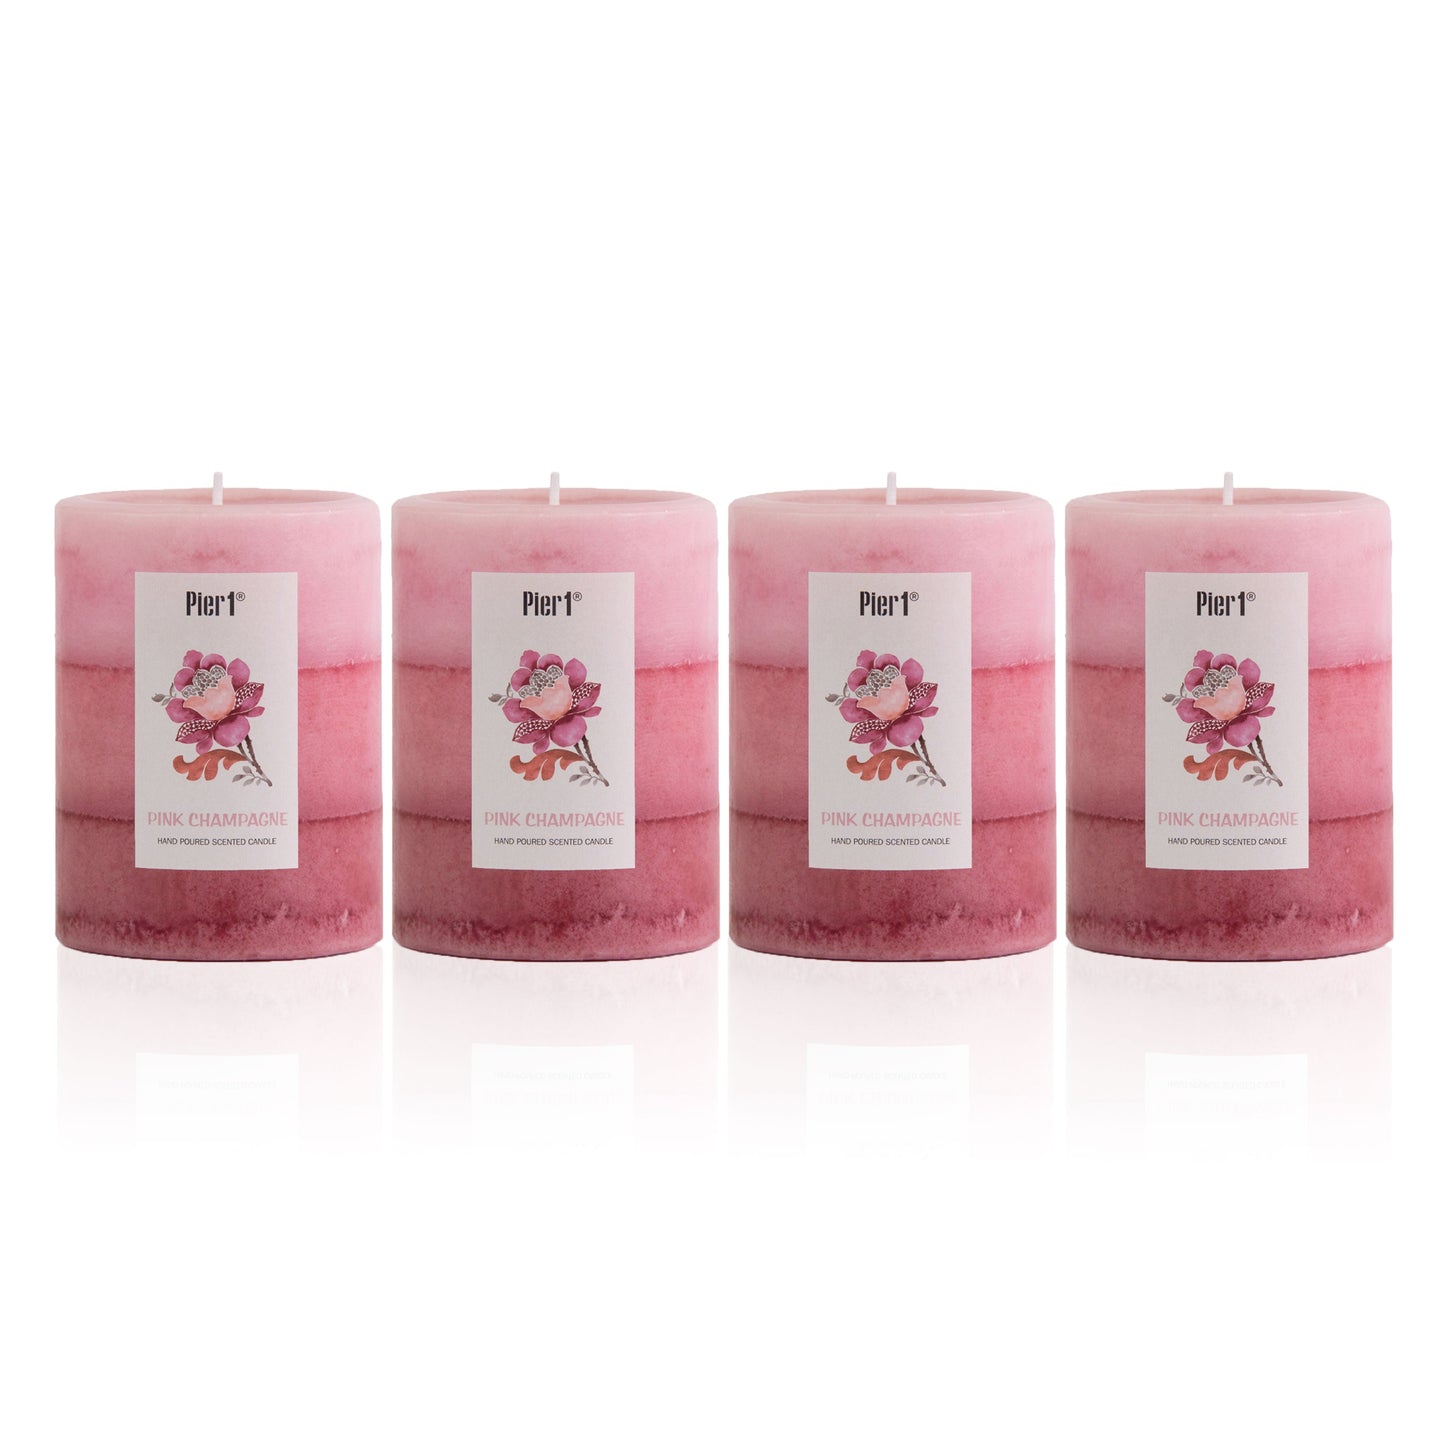 Pier 1 Pink Champagne 3x4 Layered Set of 4 Pillar Candles - The Home Resolution